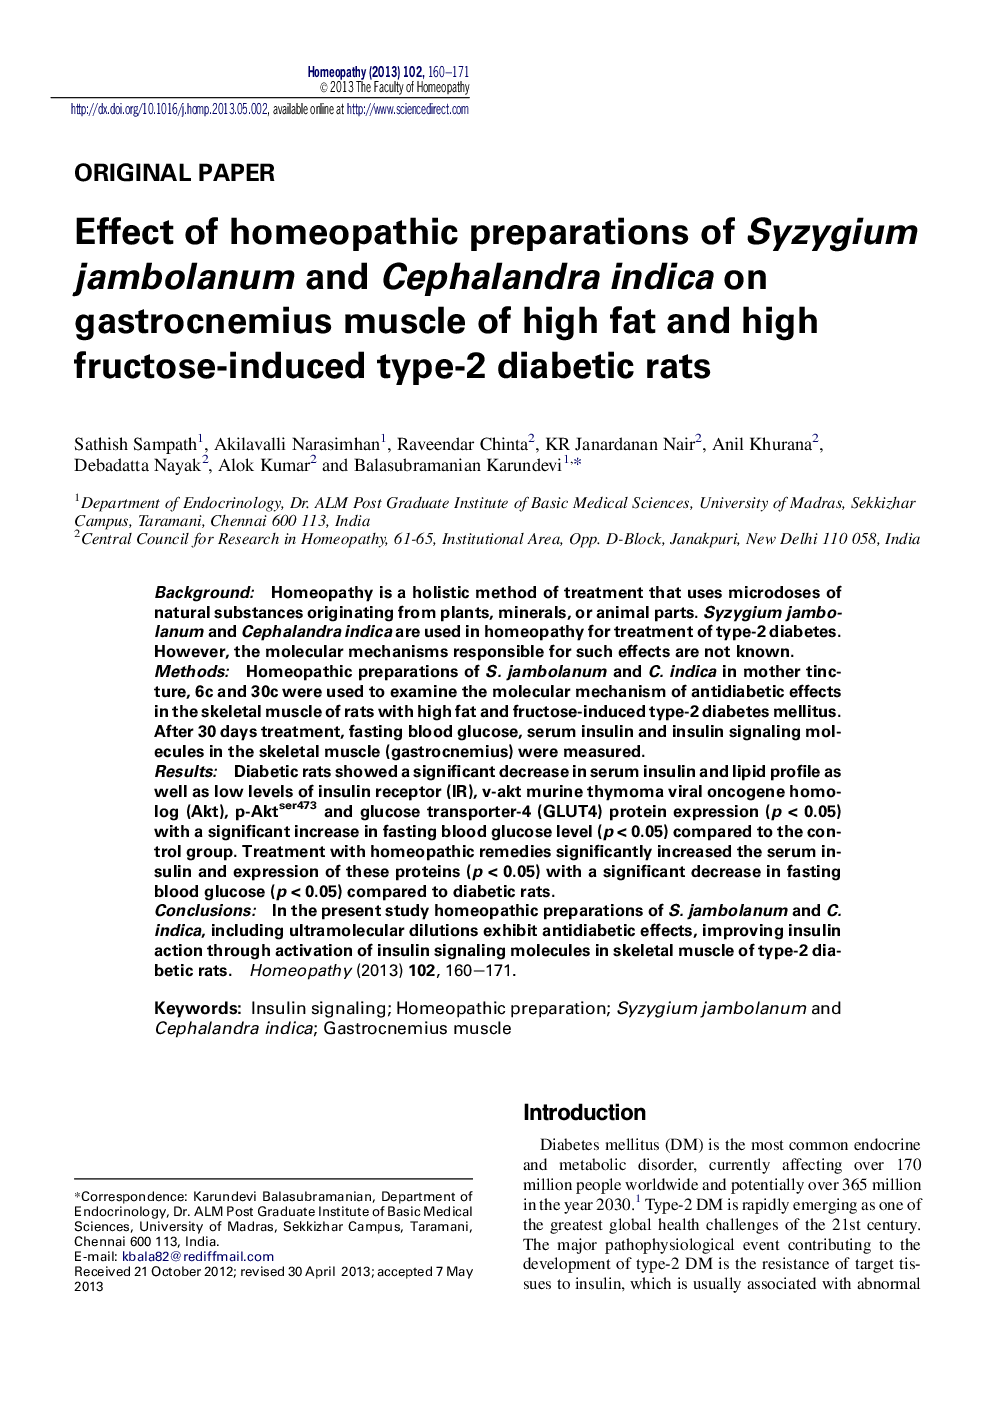 Effect of homeopathic preparations of Syzygium jambolanum and Cephalandra indica on gastrocnemius muscle of high fat and high fructose-induced type-2 diabetic rats